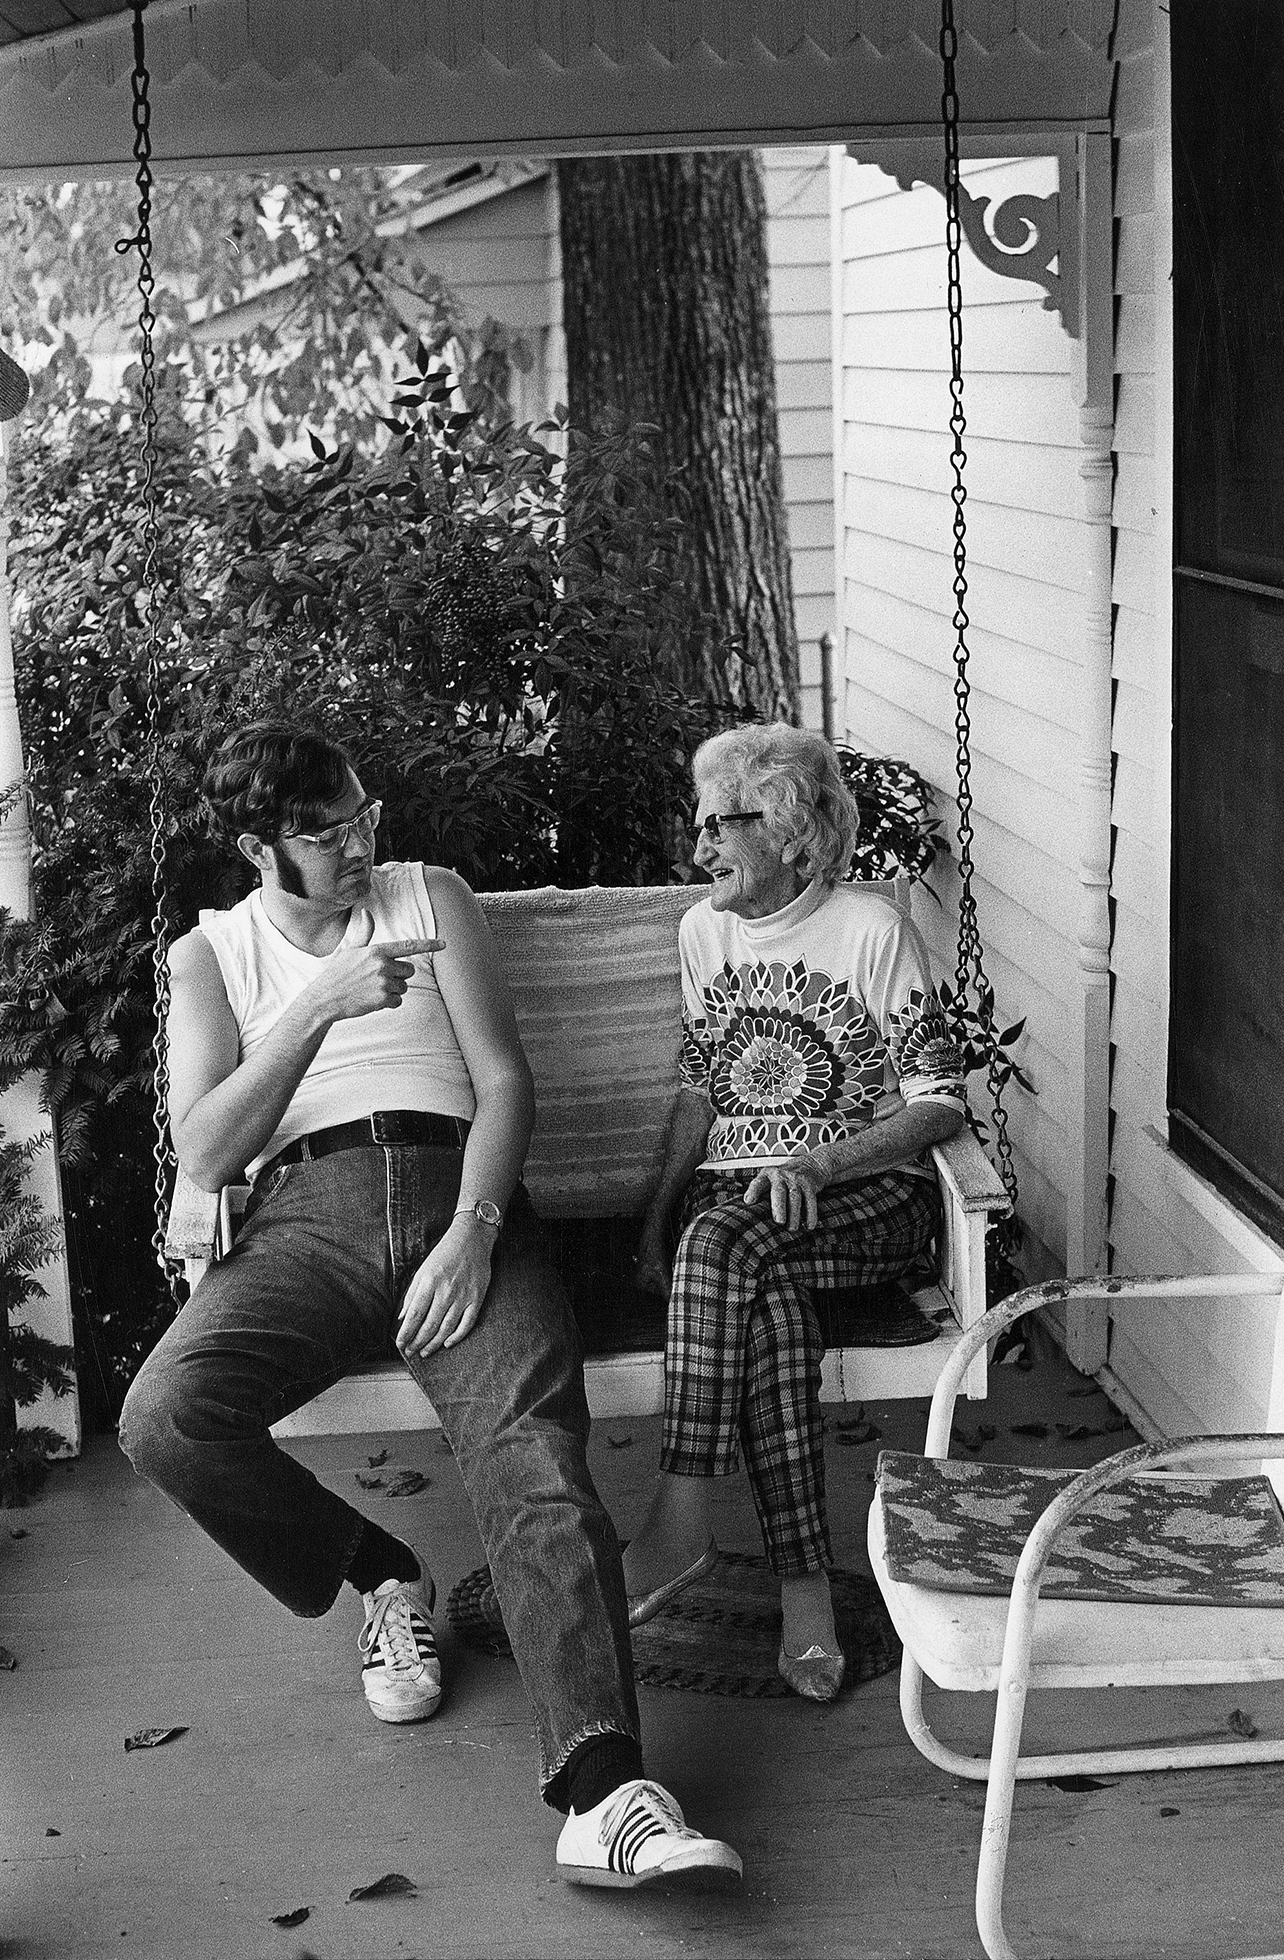 A young man with long, thick sideburns and glasses wearing a white sleeveless T-shirt, jeans, and “track shoes” circa 1970 and an old woman in a sweater and plaid pants sit and talk on a suspended swing on a porch. He points at her while she smiles.